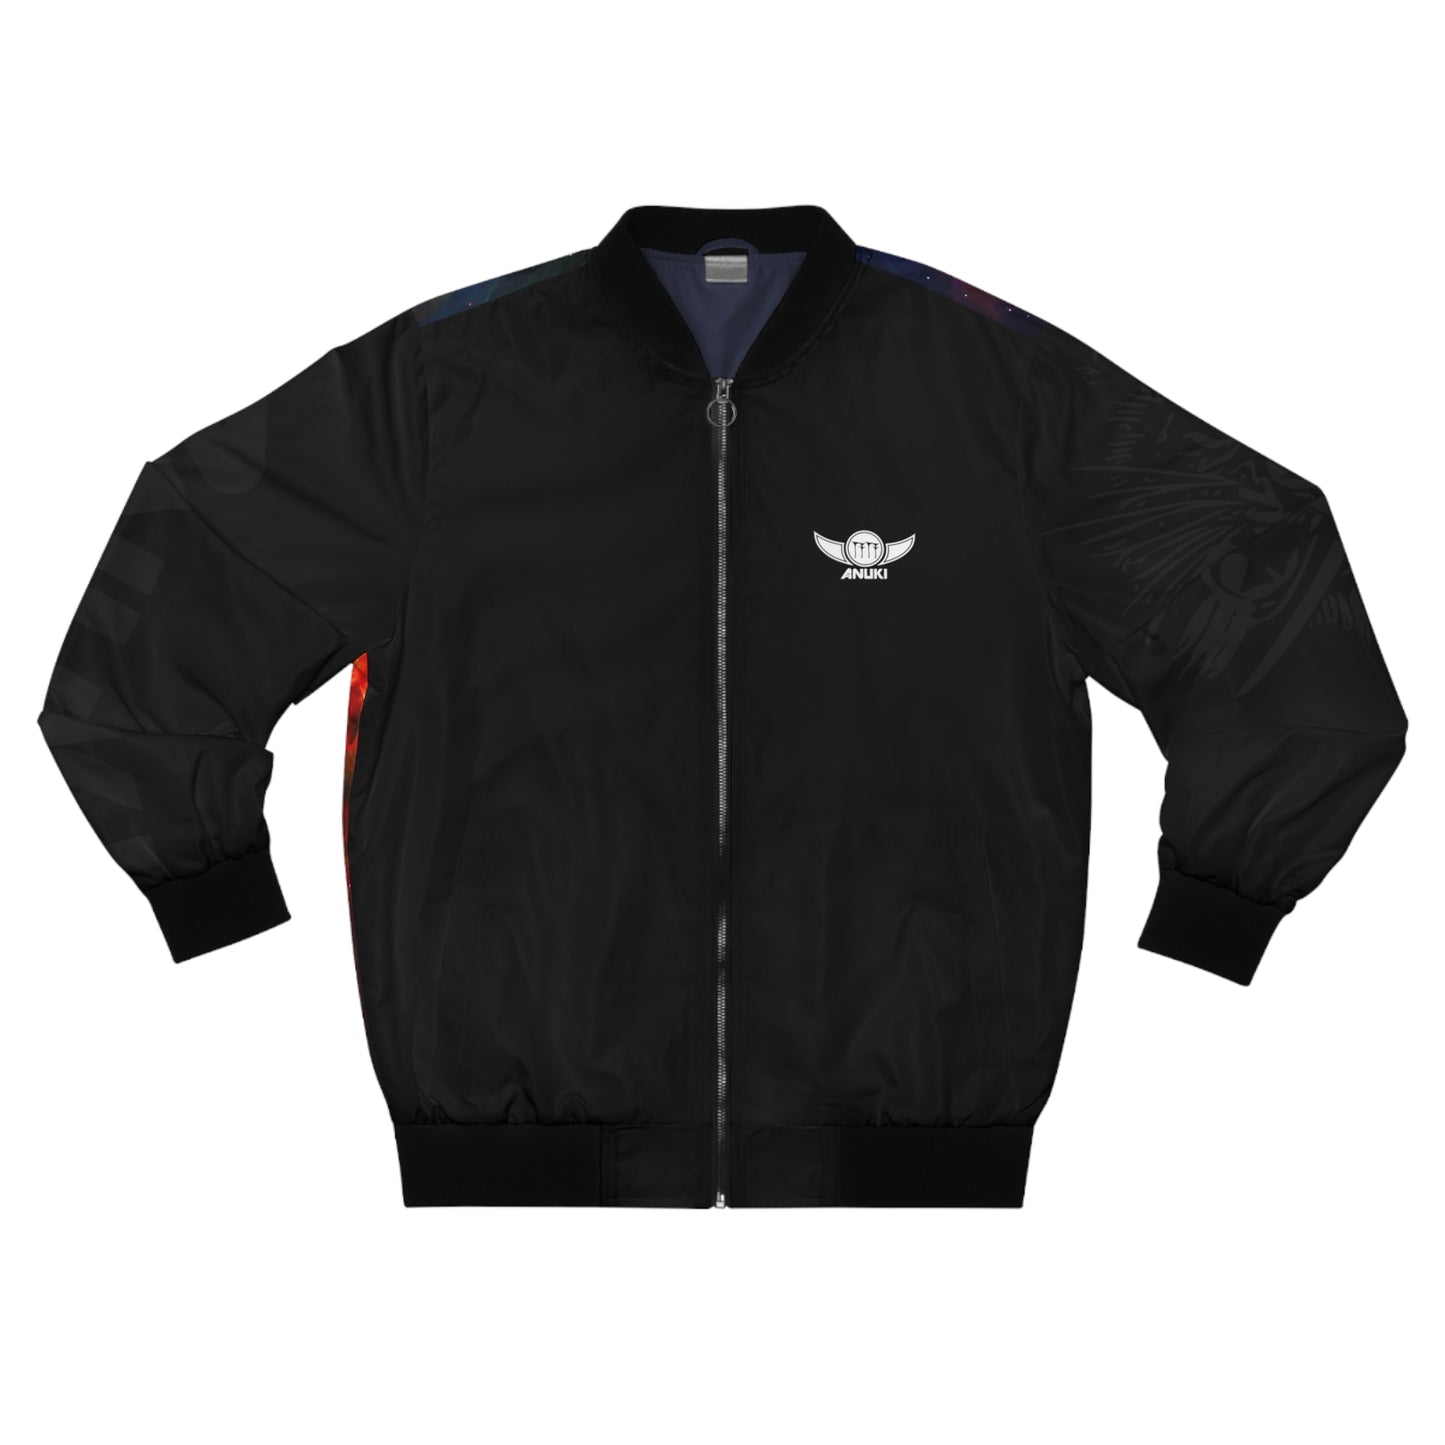 The Orion Jacket